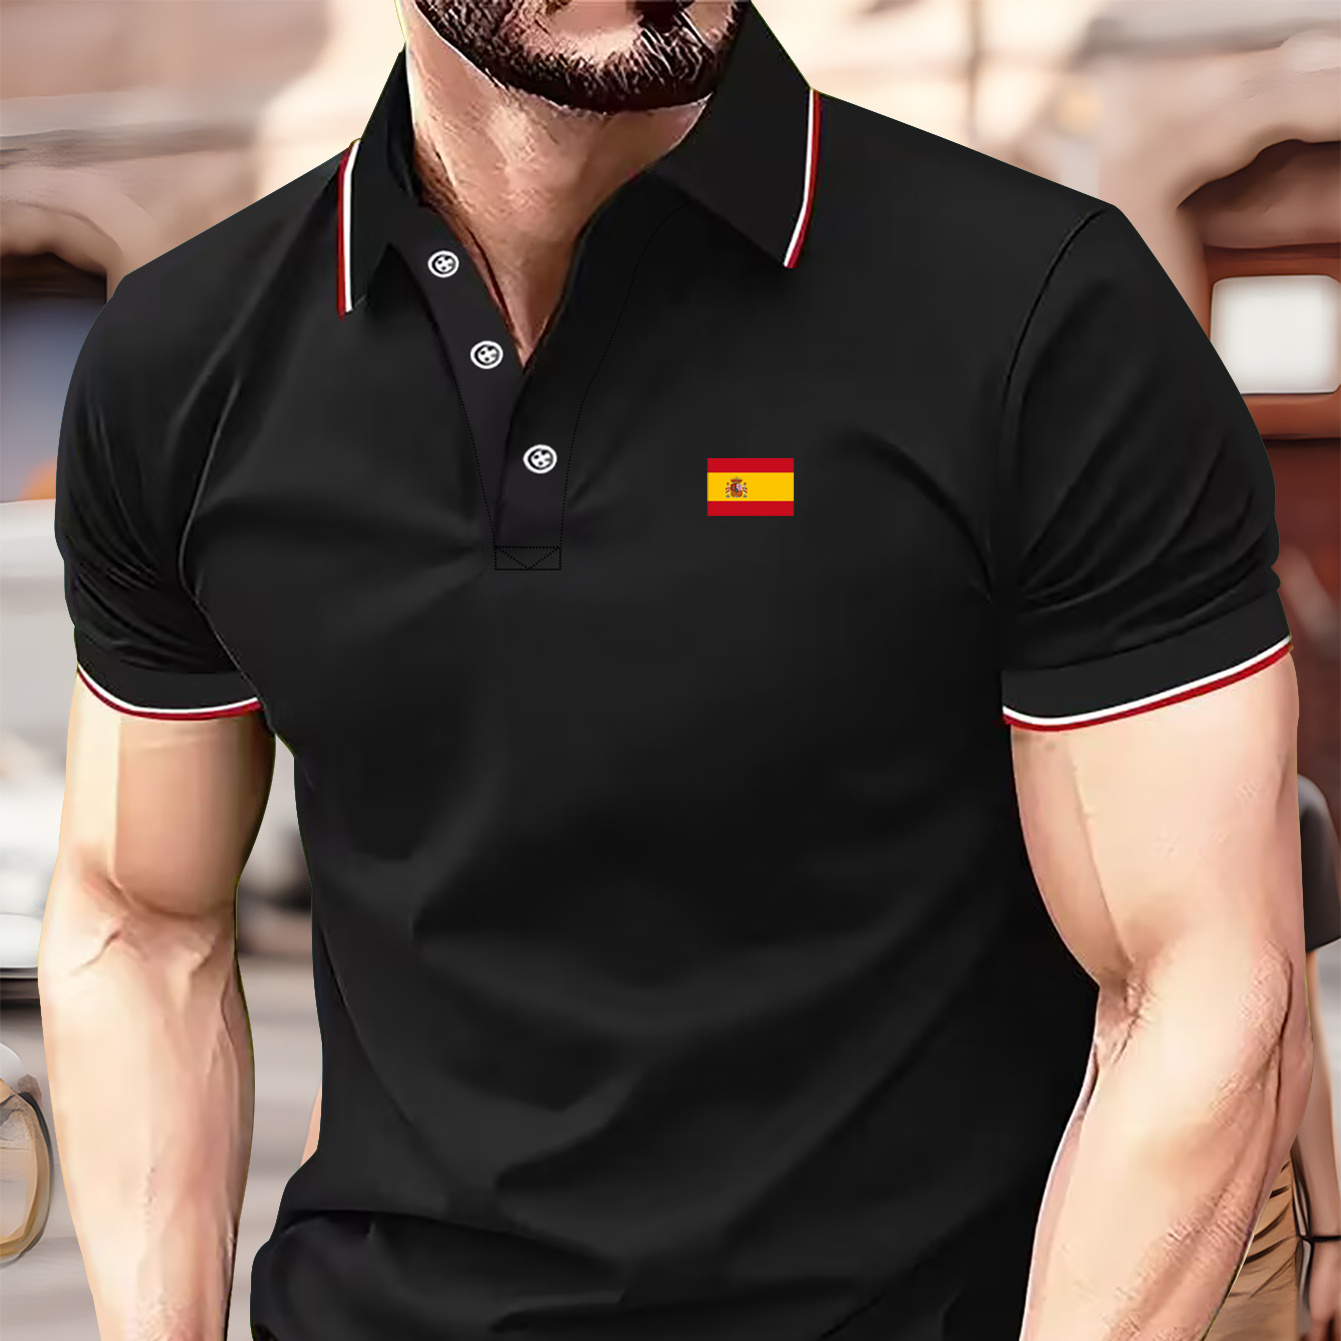 

Spain Flag Print Men's Short Sleeve Lapel Golf T-shirt, Summer Trendy Tennis Tees, Casual Comfy Breathable Top For Outdoor Sports